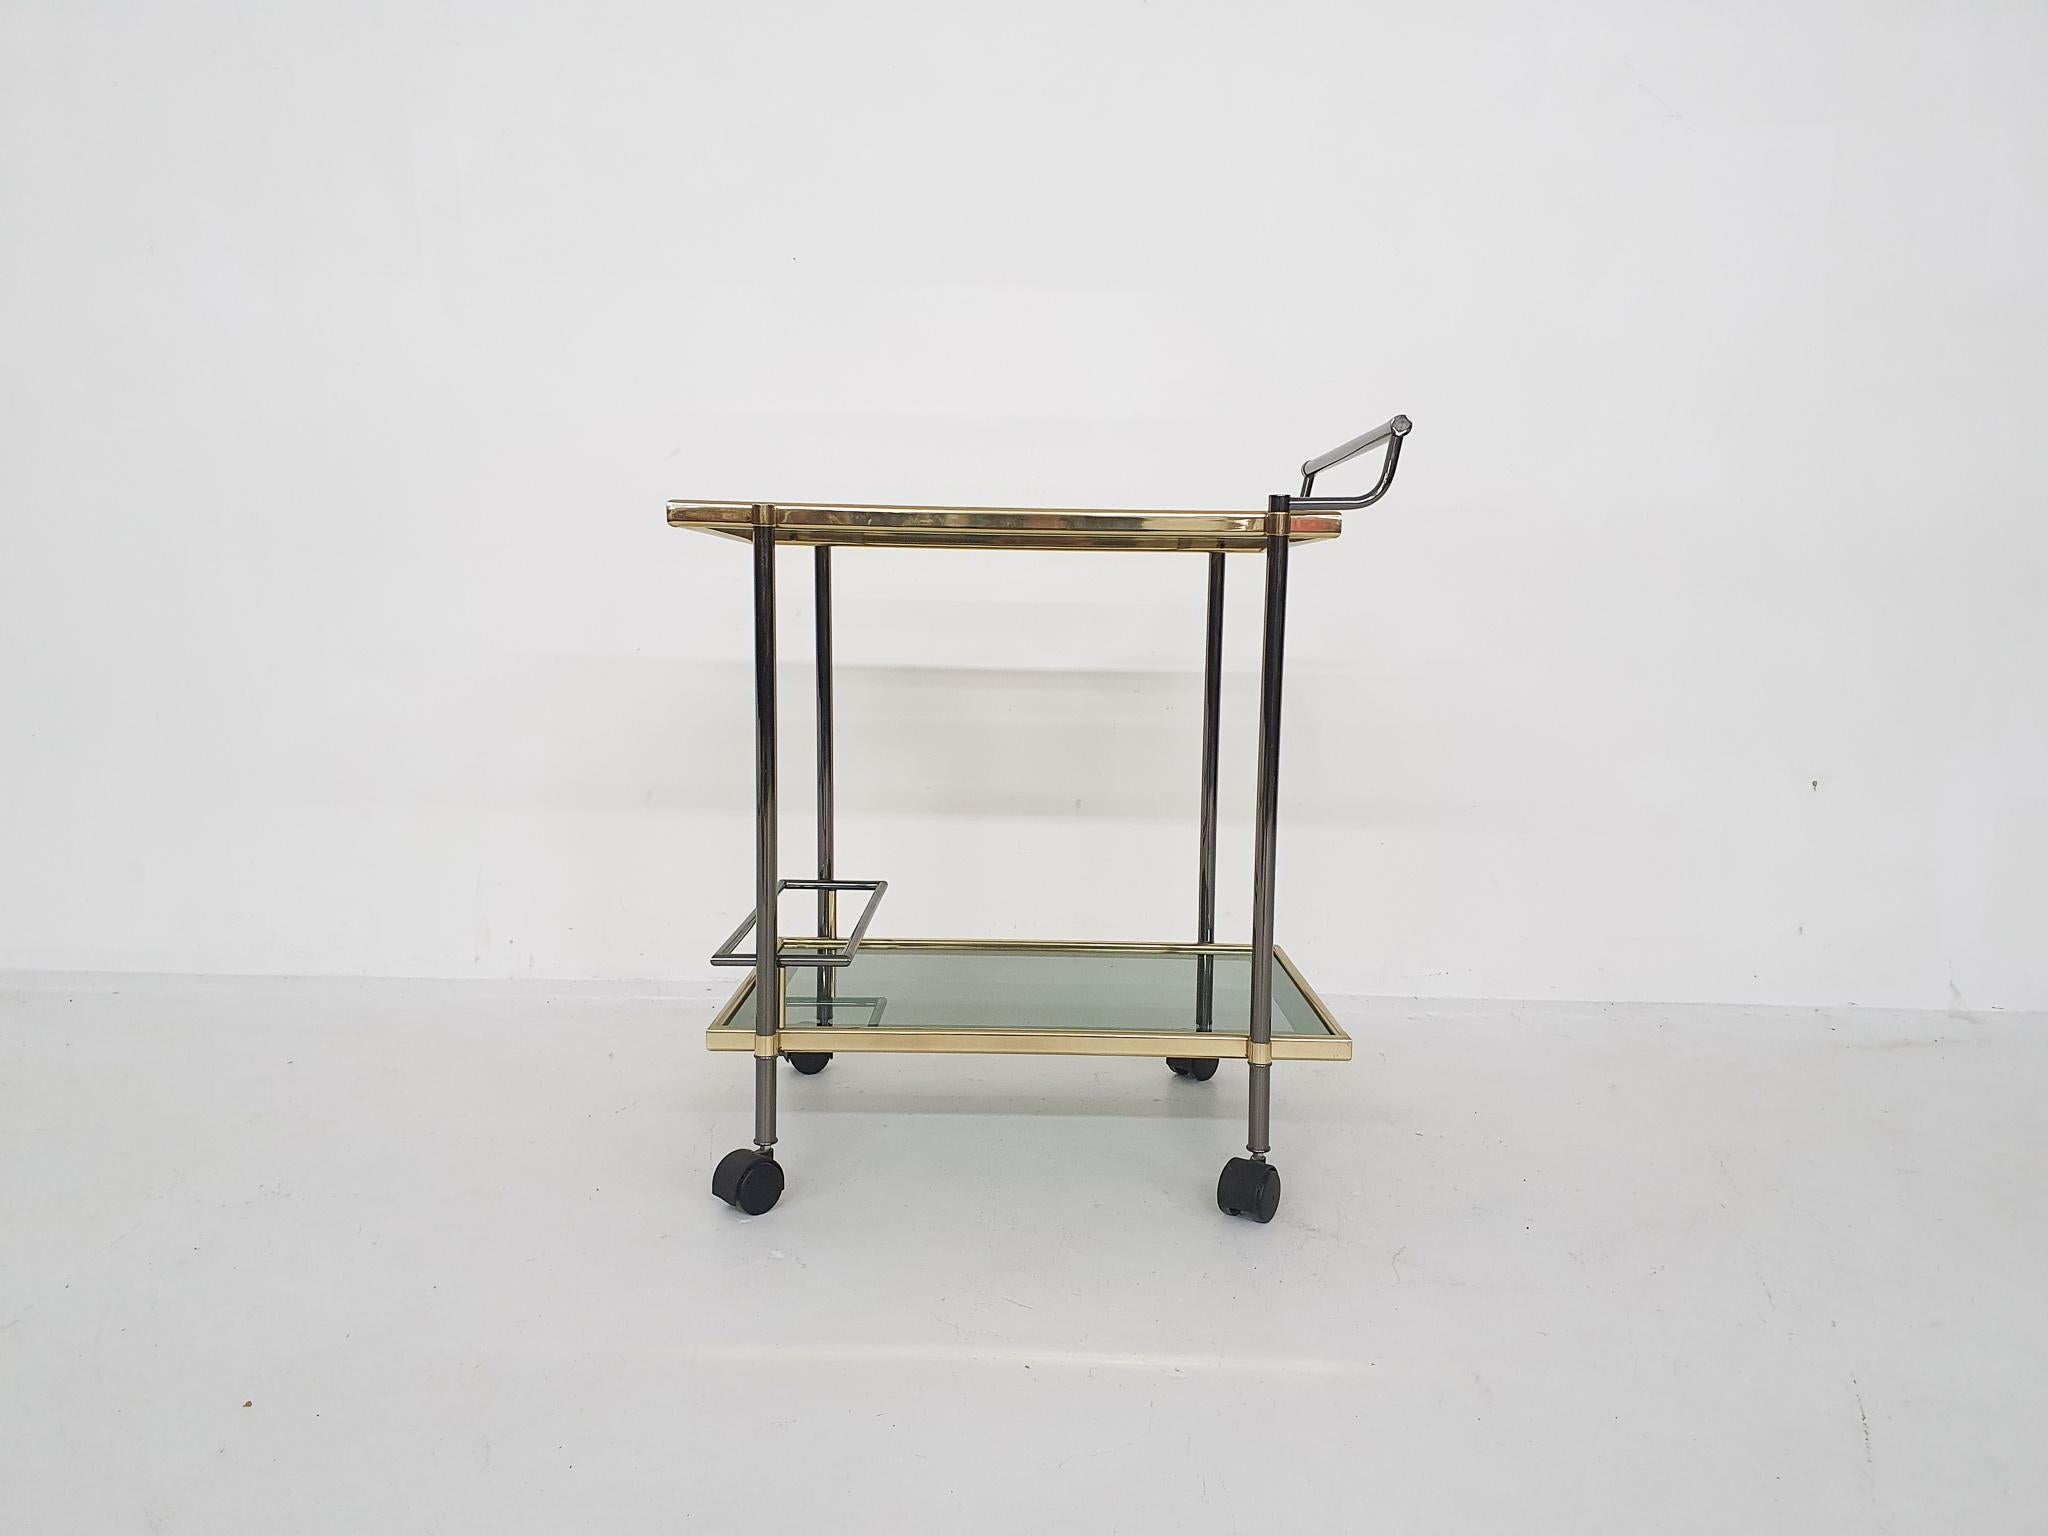 Bar cart with smoked glass top and shelf
In good condition.